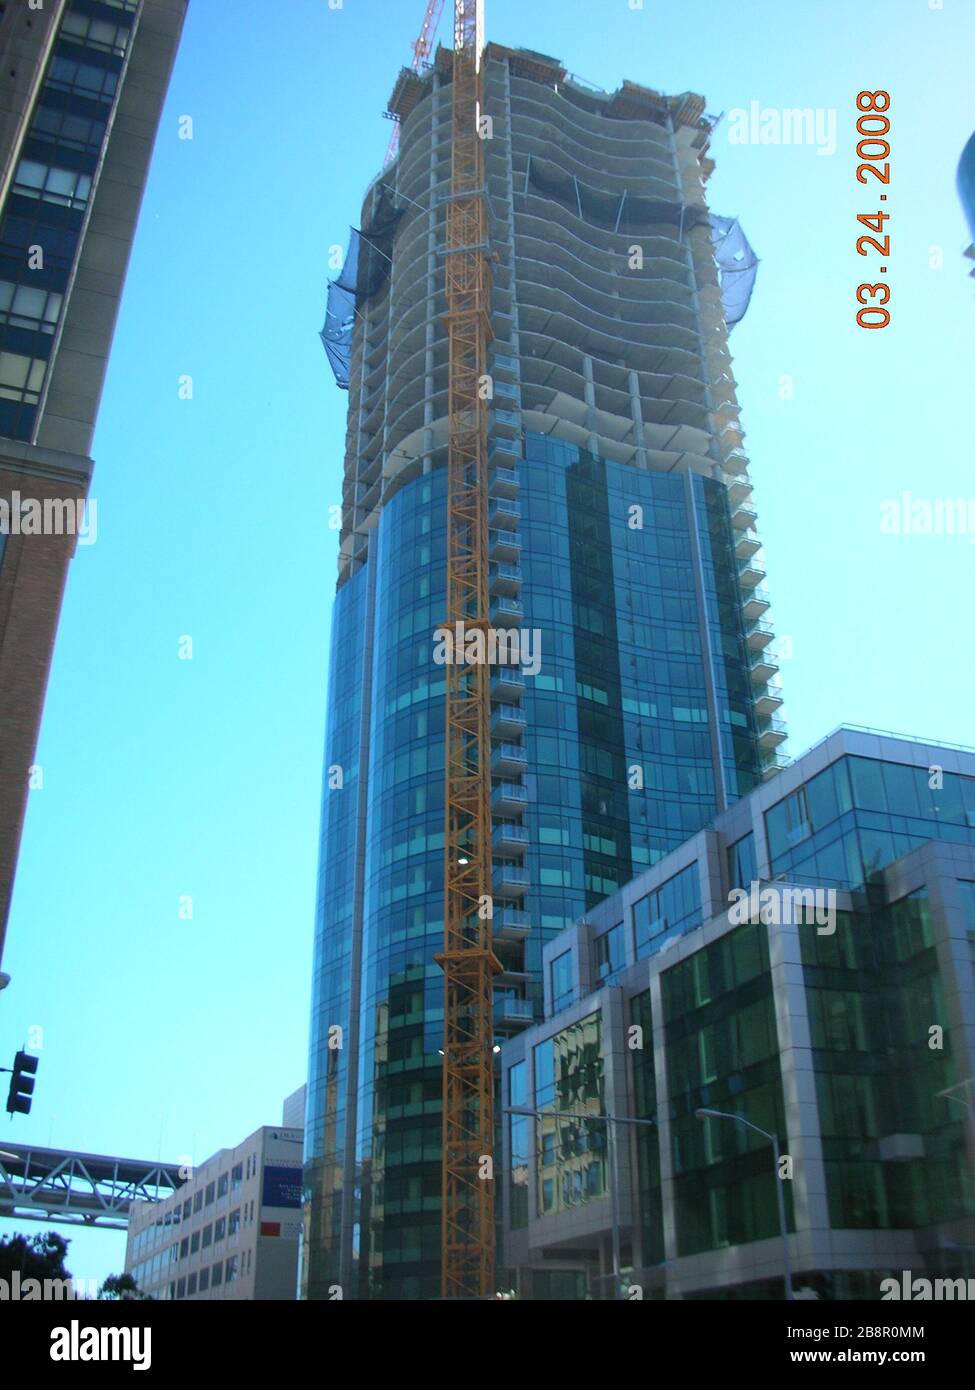 'English: The Infinity (300 Spear Street) tower I under construction in San Francisco. The Spear Street midrise is on the bottom left.; 24 March 2008; Own work (Original caption:  I created this work entirely by myself) Transferred from en.wikipedia to Commons by User:Magnus Manske using CommonsHelper.; Cheers. Trance addict - Armin van Buuren - Oceanlab; ' Stock Photo